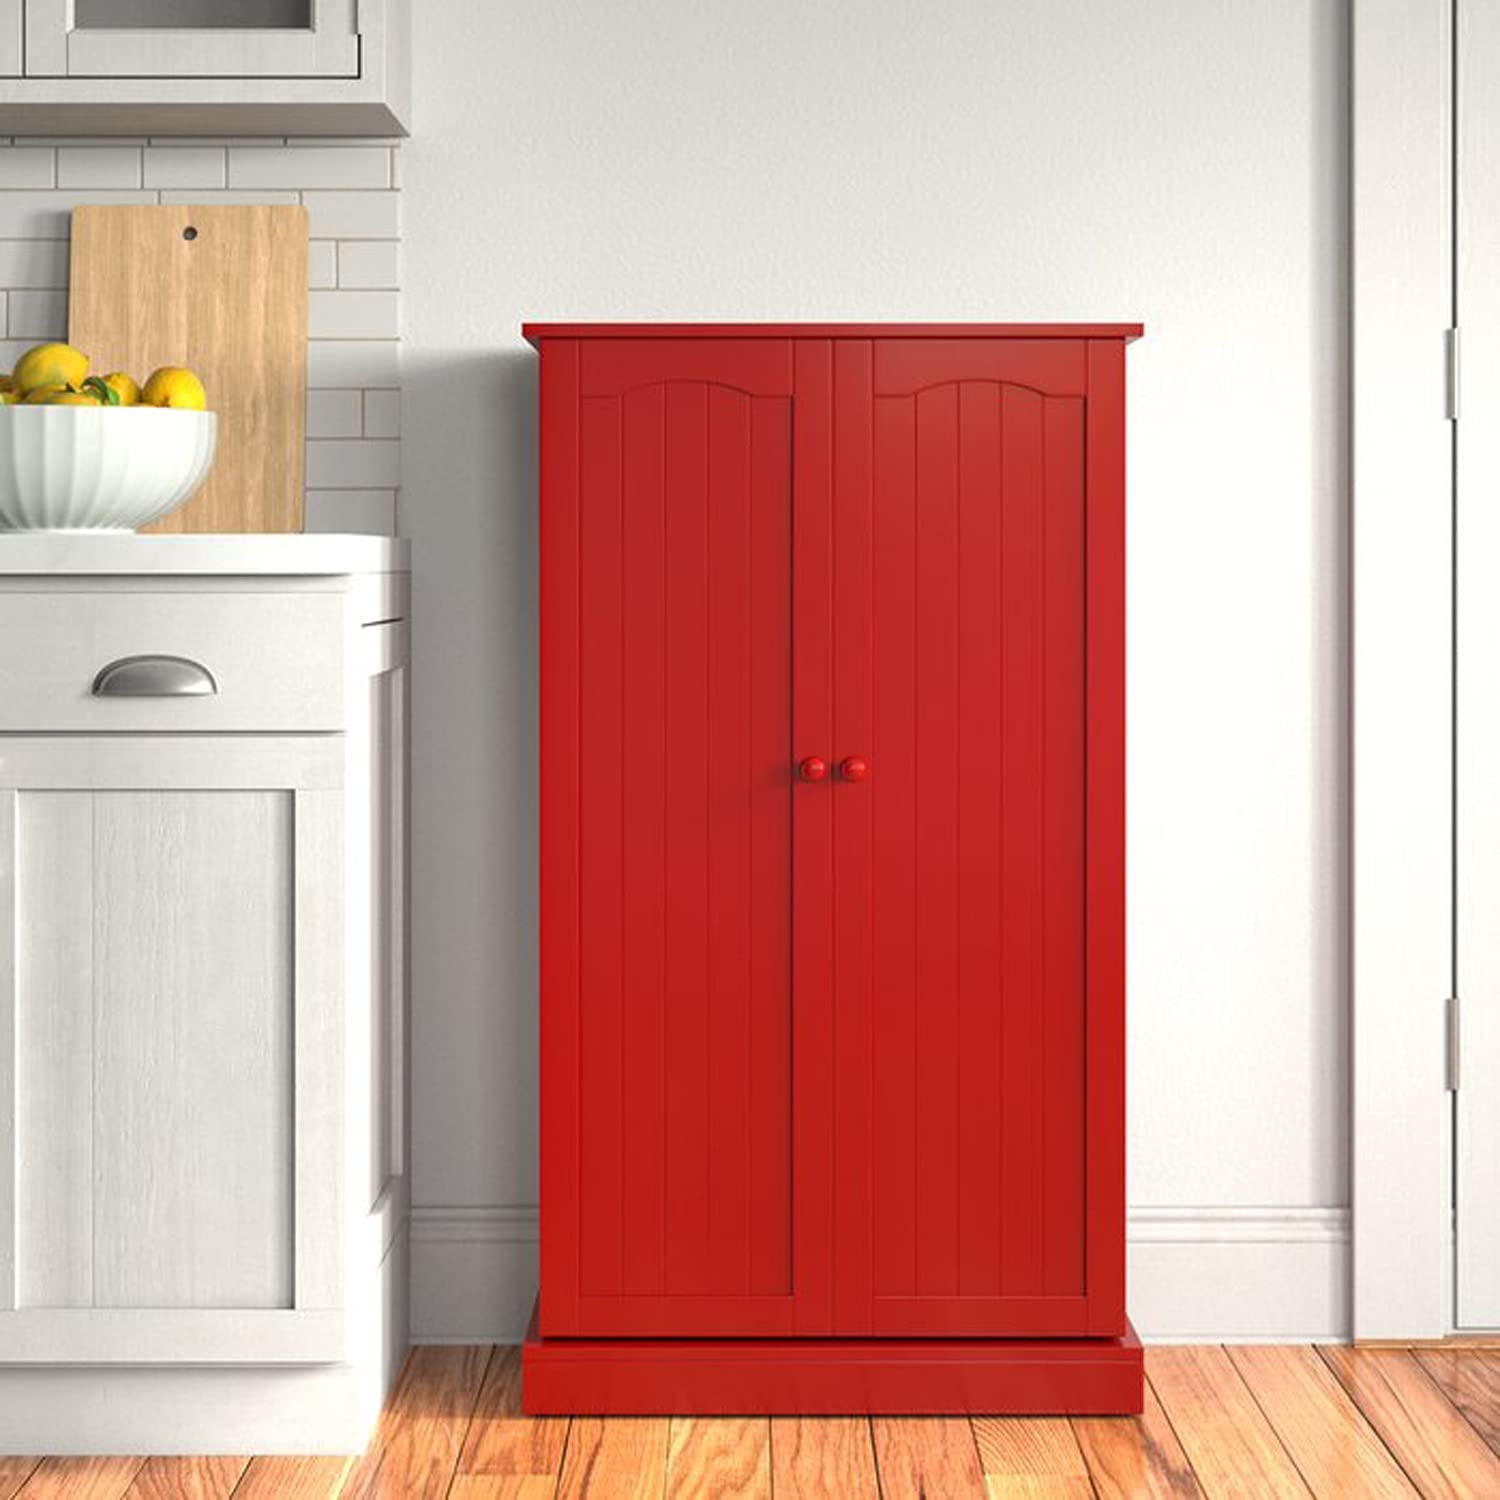 HOMEFORT 41" Kitchen Pantry, Farmhouse Pantry Cabinet, Storage Cabinet with Doors and Adjustable Shelves (Red) - image 2 of 5